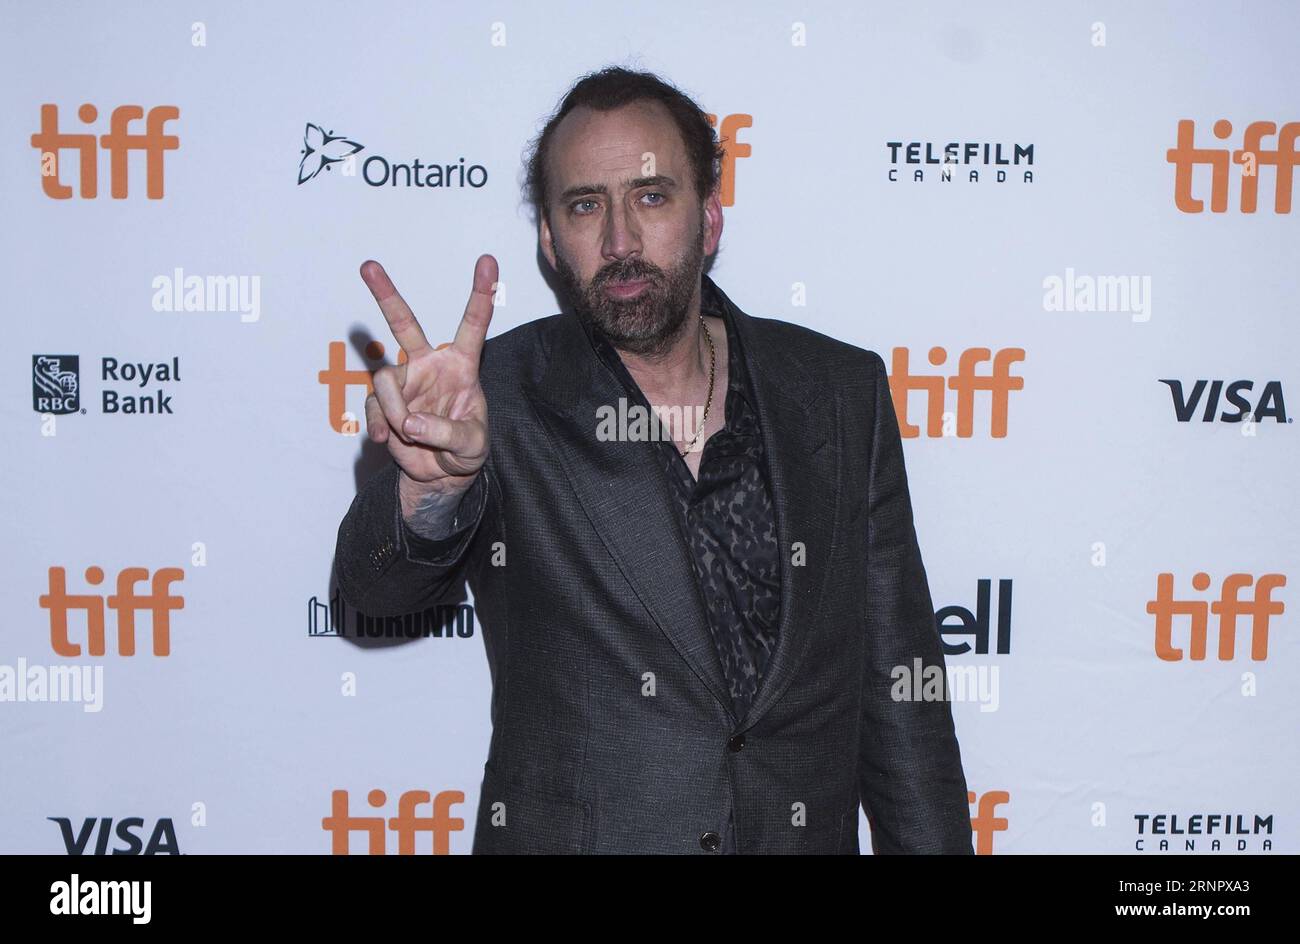 (170910) -- TORONTO, Sept. 10, 2017 -- Actor Nicolas Cage attends the world premiere of the film Mom and Dad at Ryerson Theatre during the 2017 Toronto International Film Festival in Toronto, Canada, Sept. 9, 2017. ) CANADA-TORONTO-FILM FESTIVAL-NICOLAS CAGE ZouxZheng PUBLICATIONxNOTxINxCHN Stock Photo